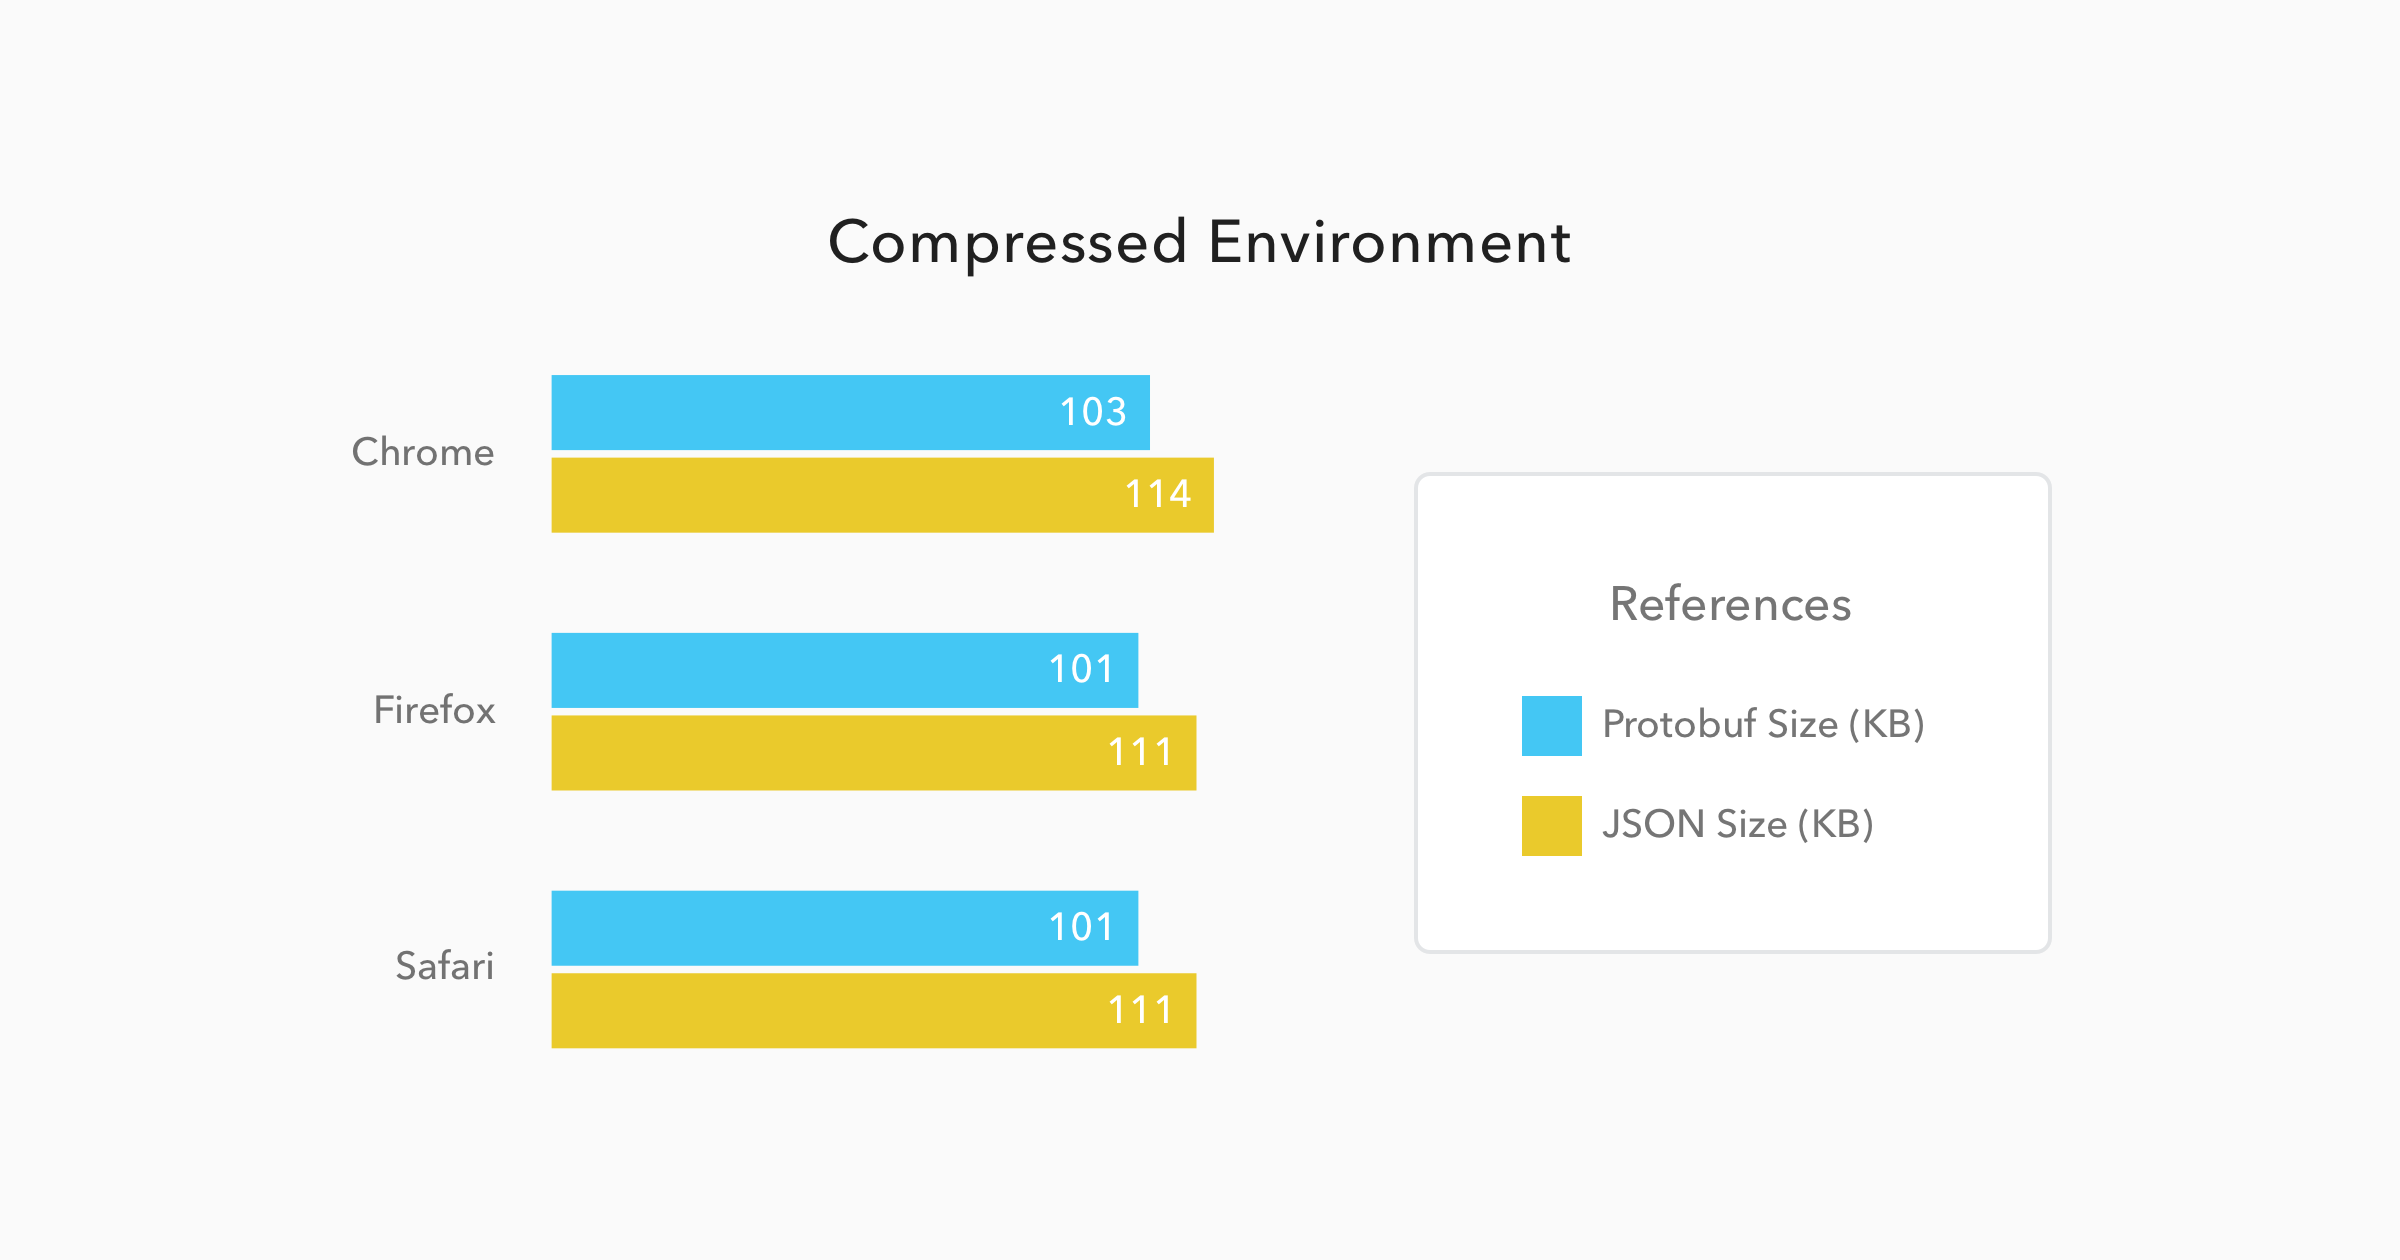 Comparison of Protobuf/JSON payload sizes on compressed GET requests